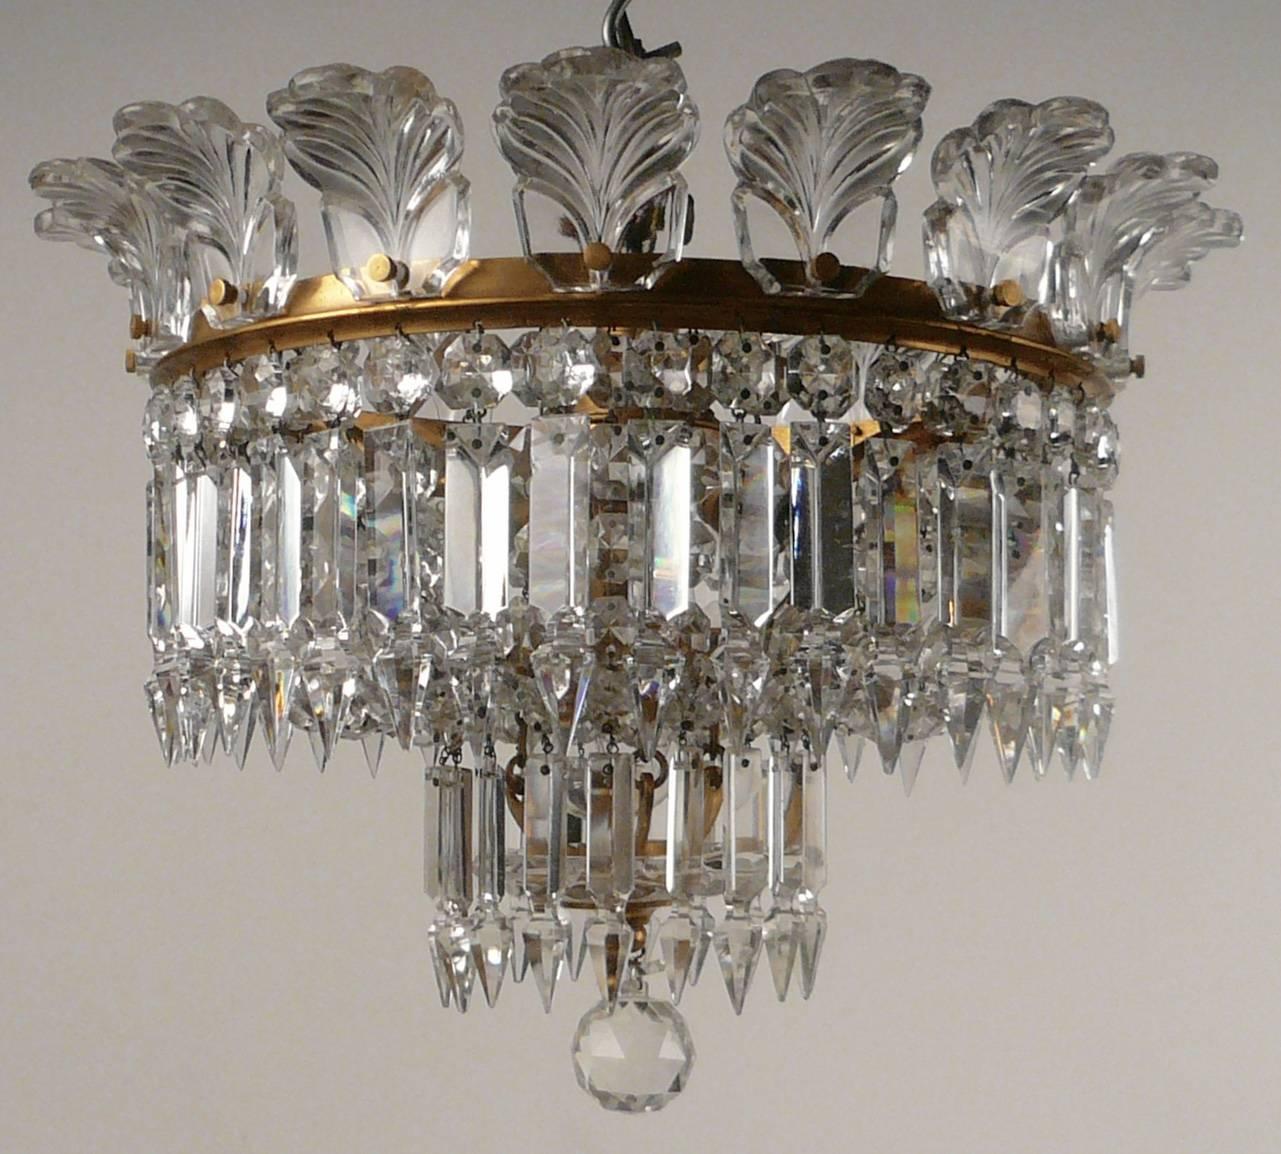 This Baccarat Crinoline chandelier is well proportioned, and of a rare small size.
It is ideal for use in a hall, dressing room, powder room or master bath.